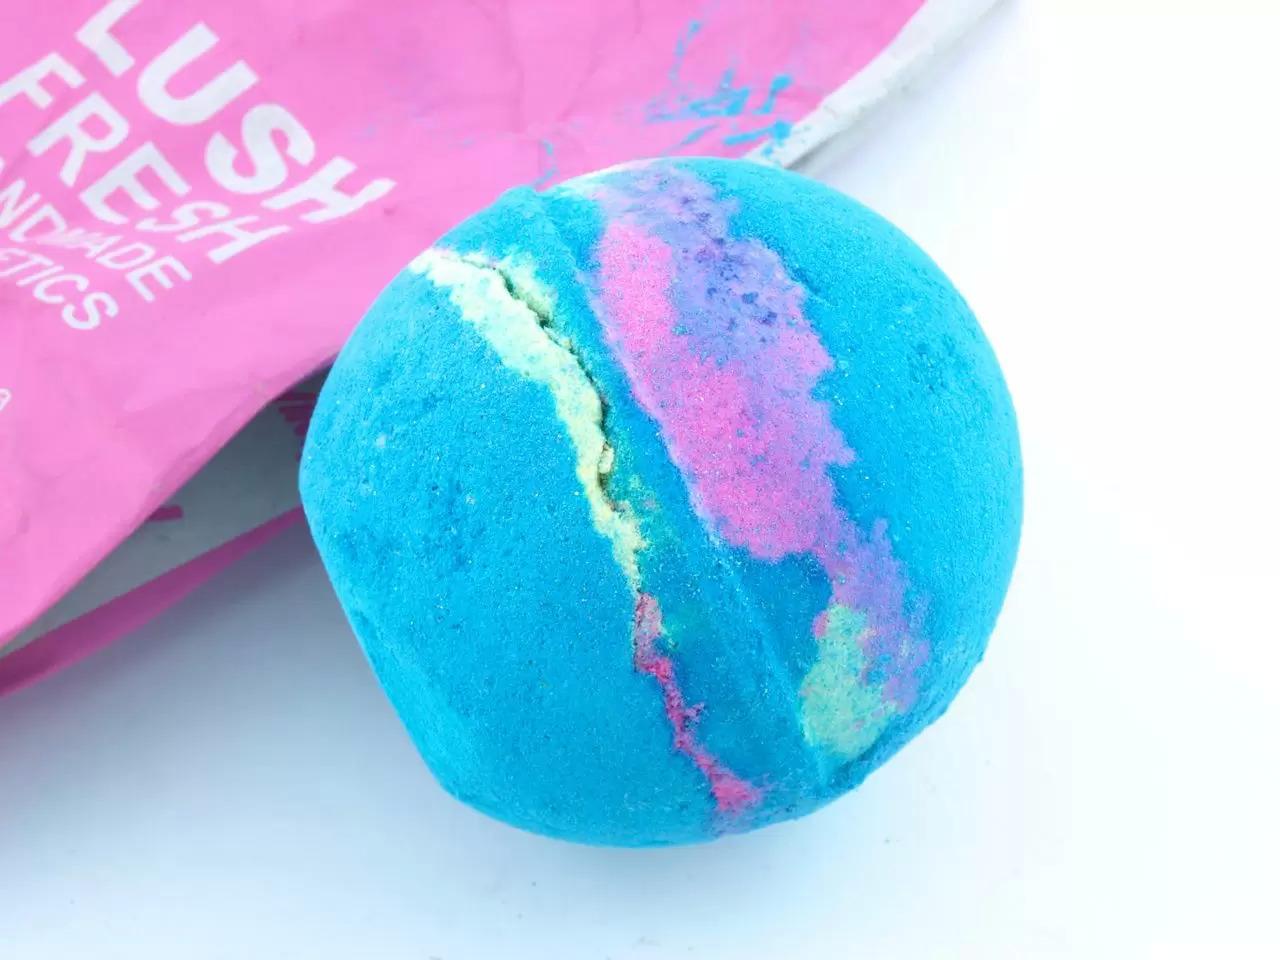 Free Bath Bomb at Lush April 30th from 11am - 3pm